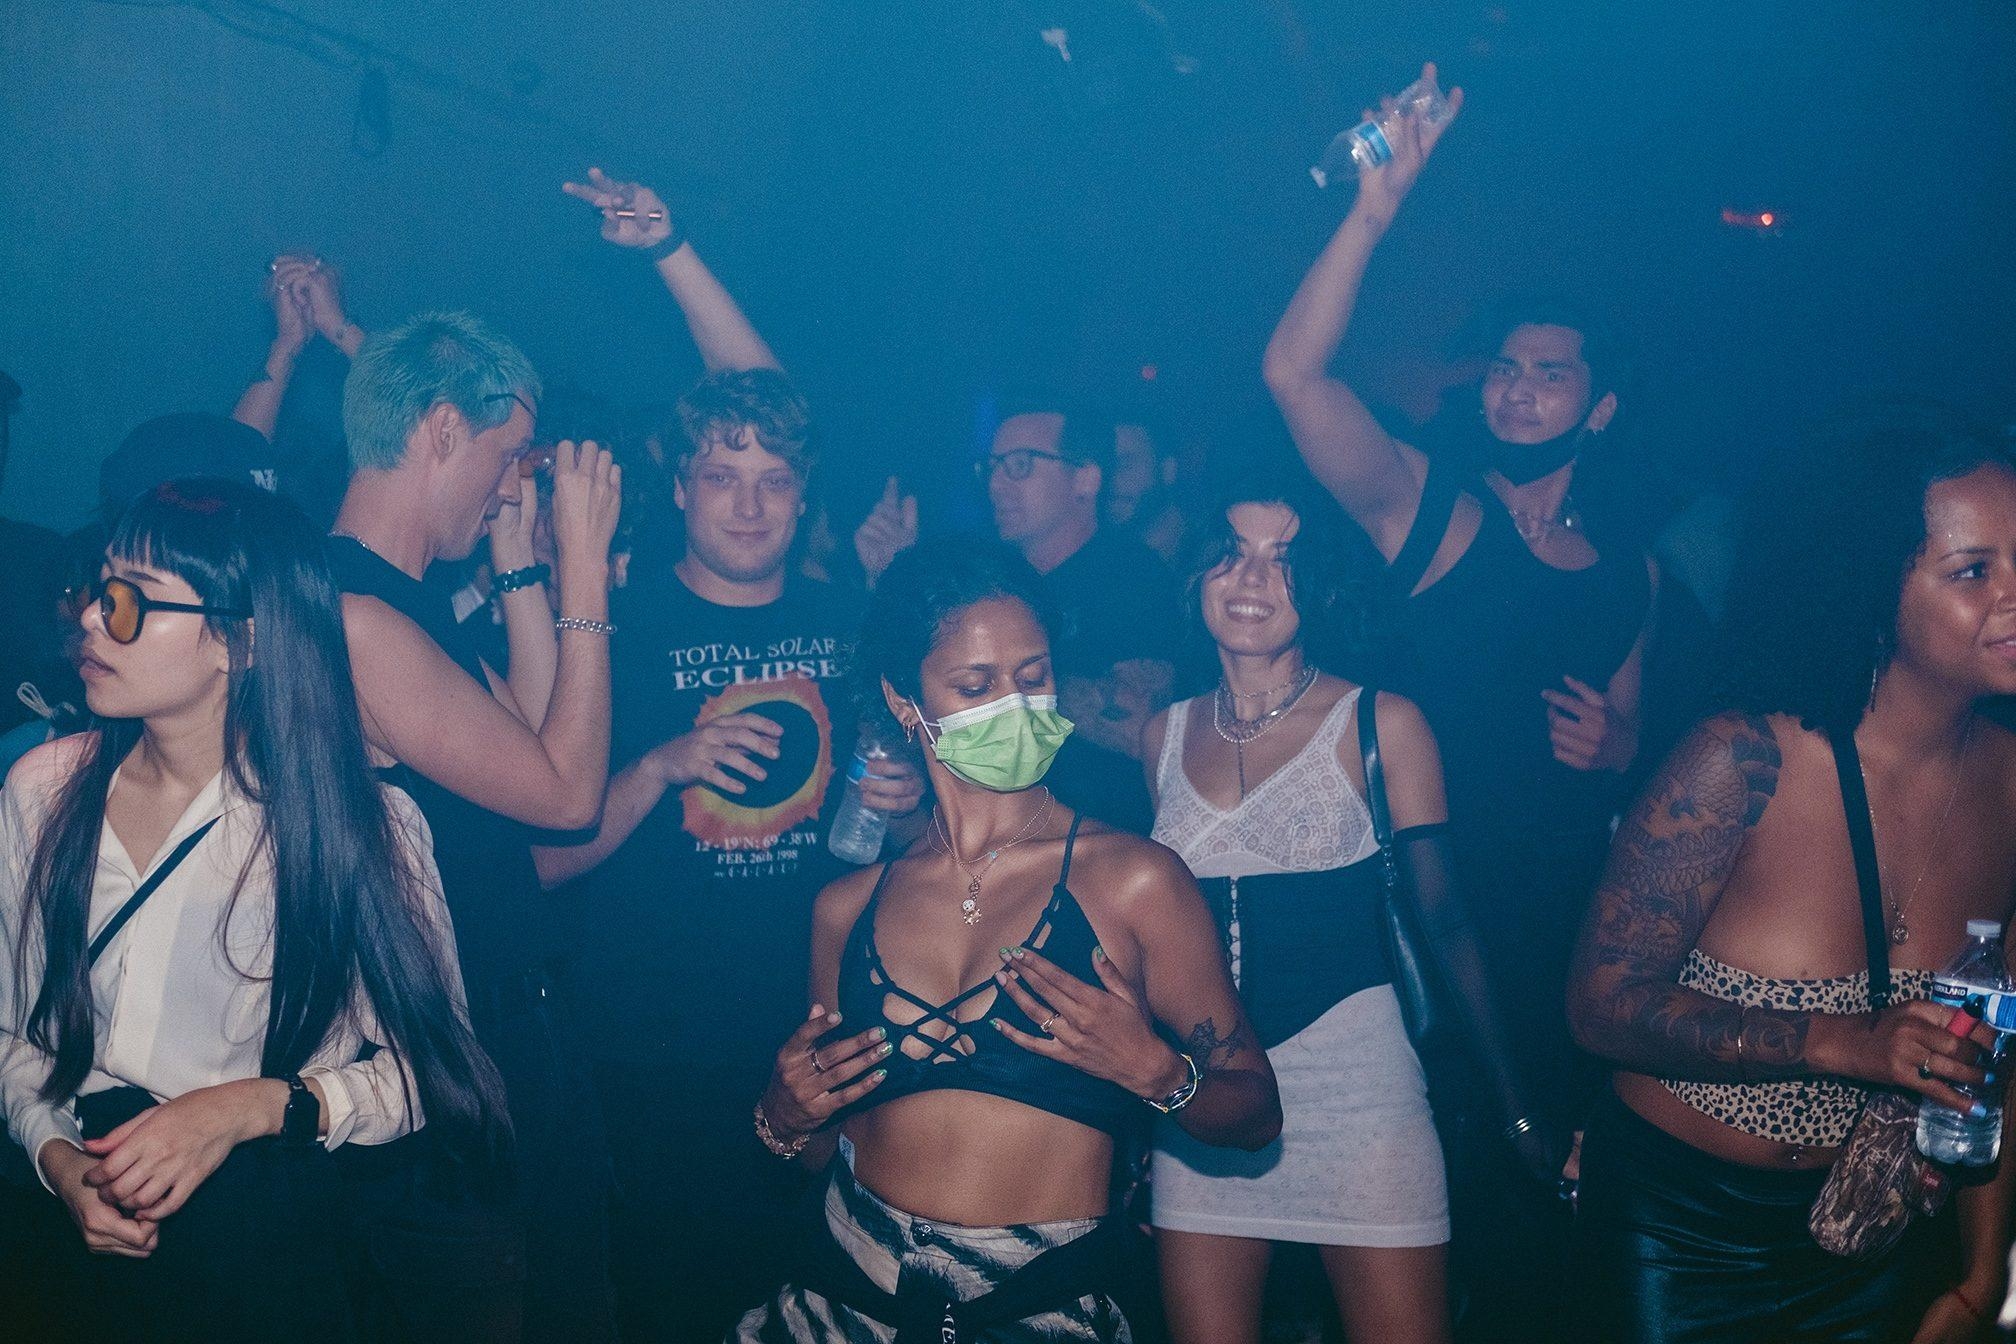 Wild Wild West After the pandemic, LAs rave underground bounces back stronger than ever - Features picture photo